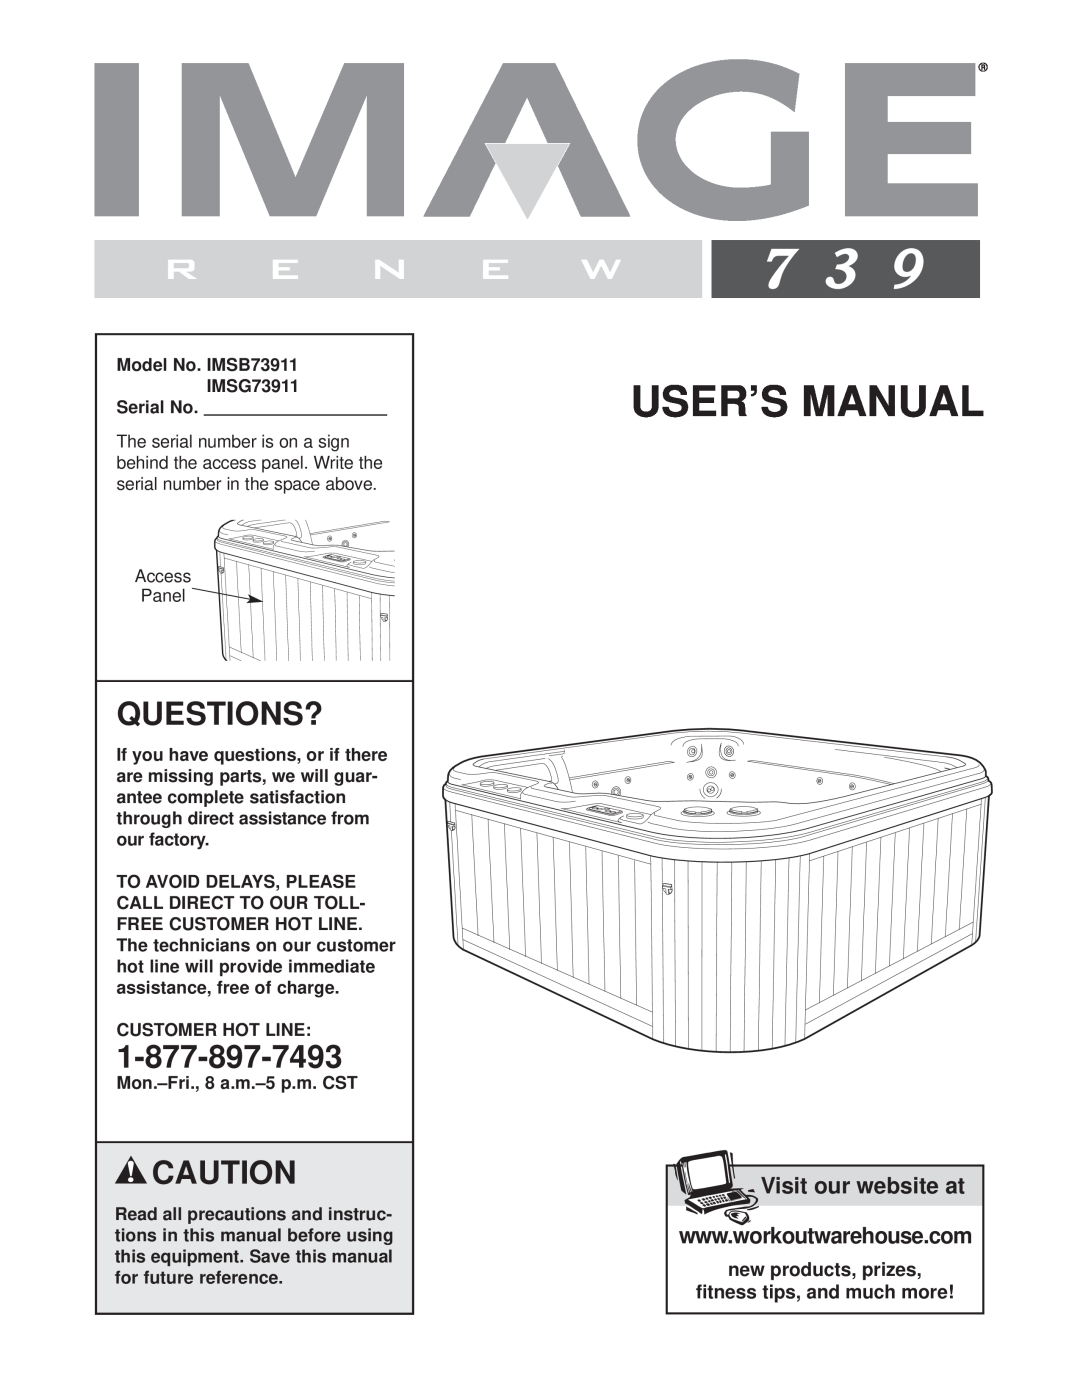 Image IMSB73911, IMSG73911 user manual Questions?, User’S Manual, Visit our website at 